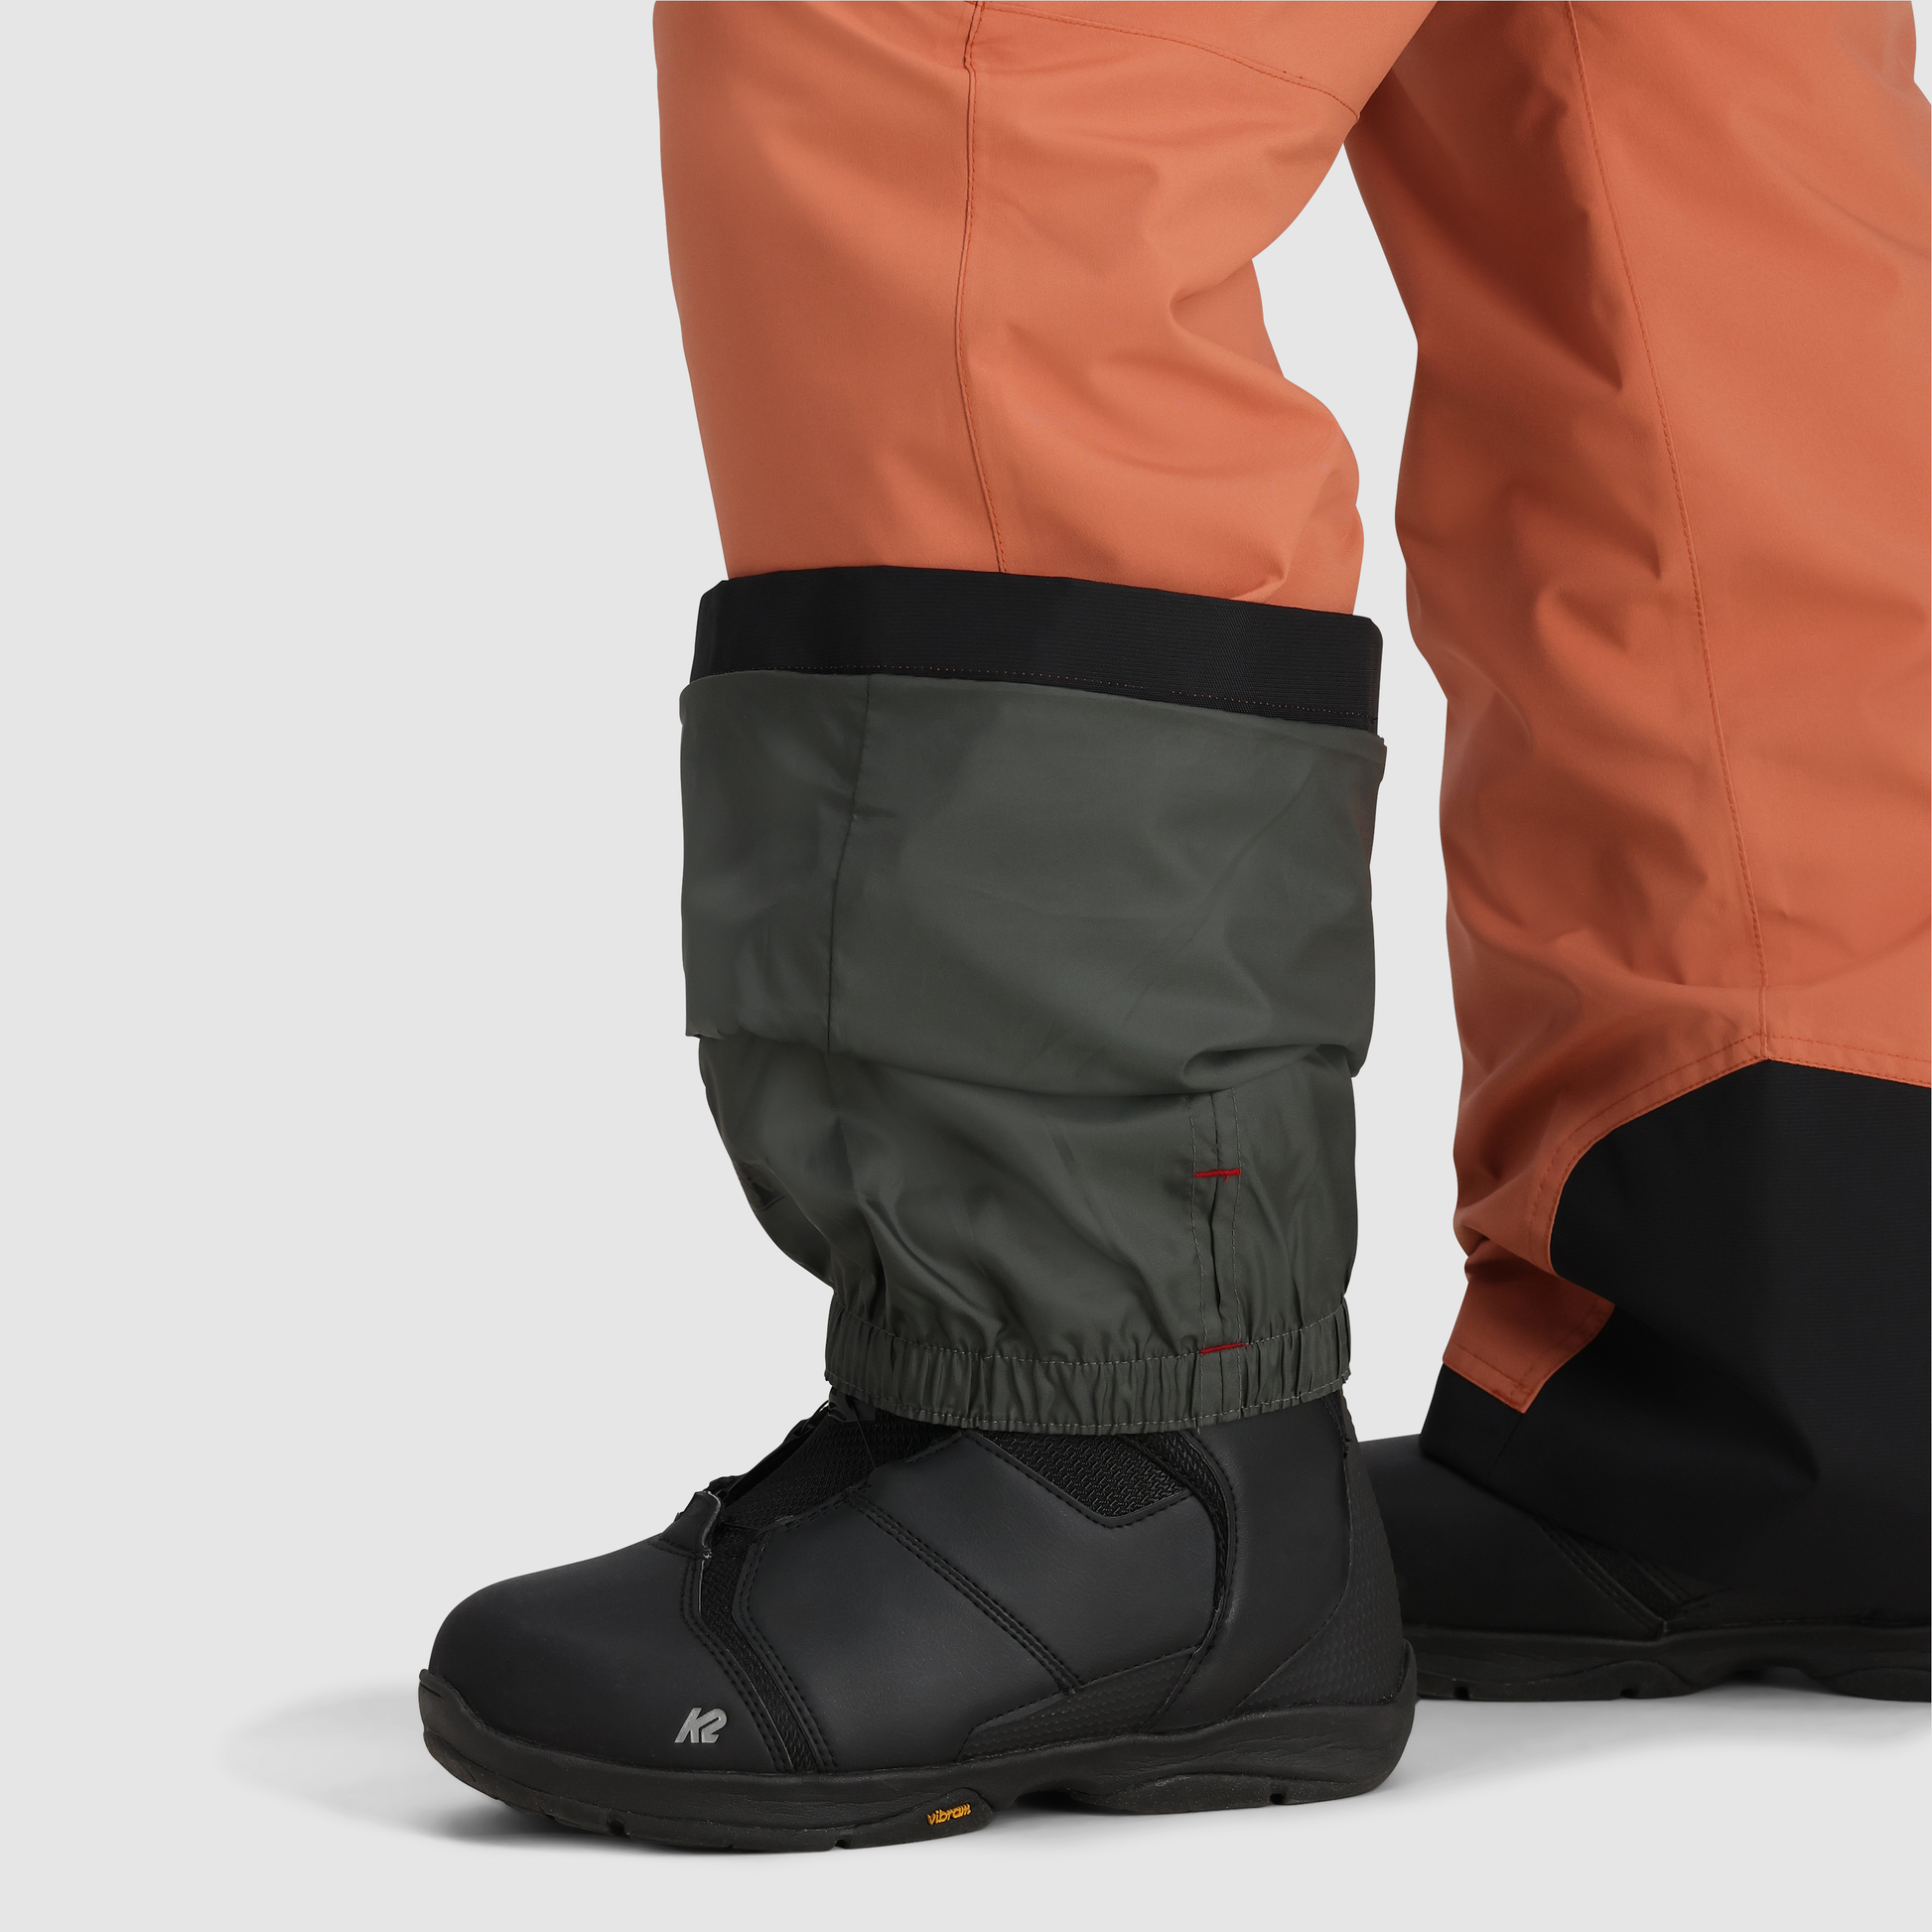 B2 :: Snow Gaiter / Keep snow out of your boots and pant legs with these built-in durable, stretchy snow gaiters.